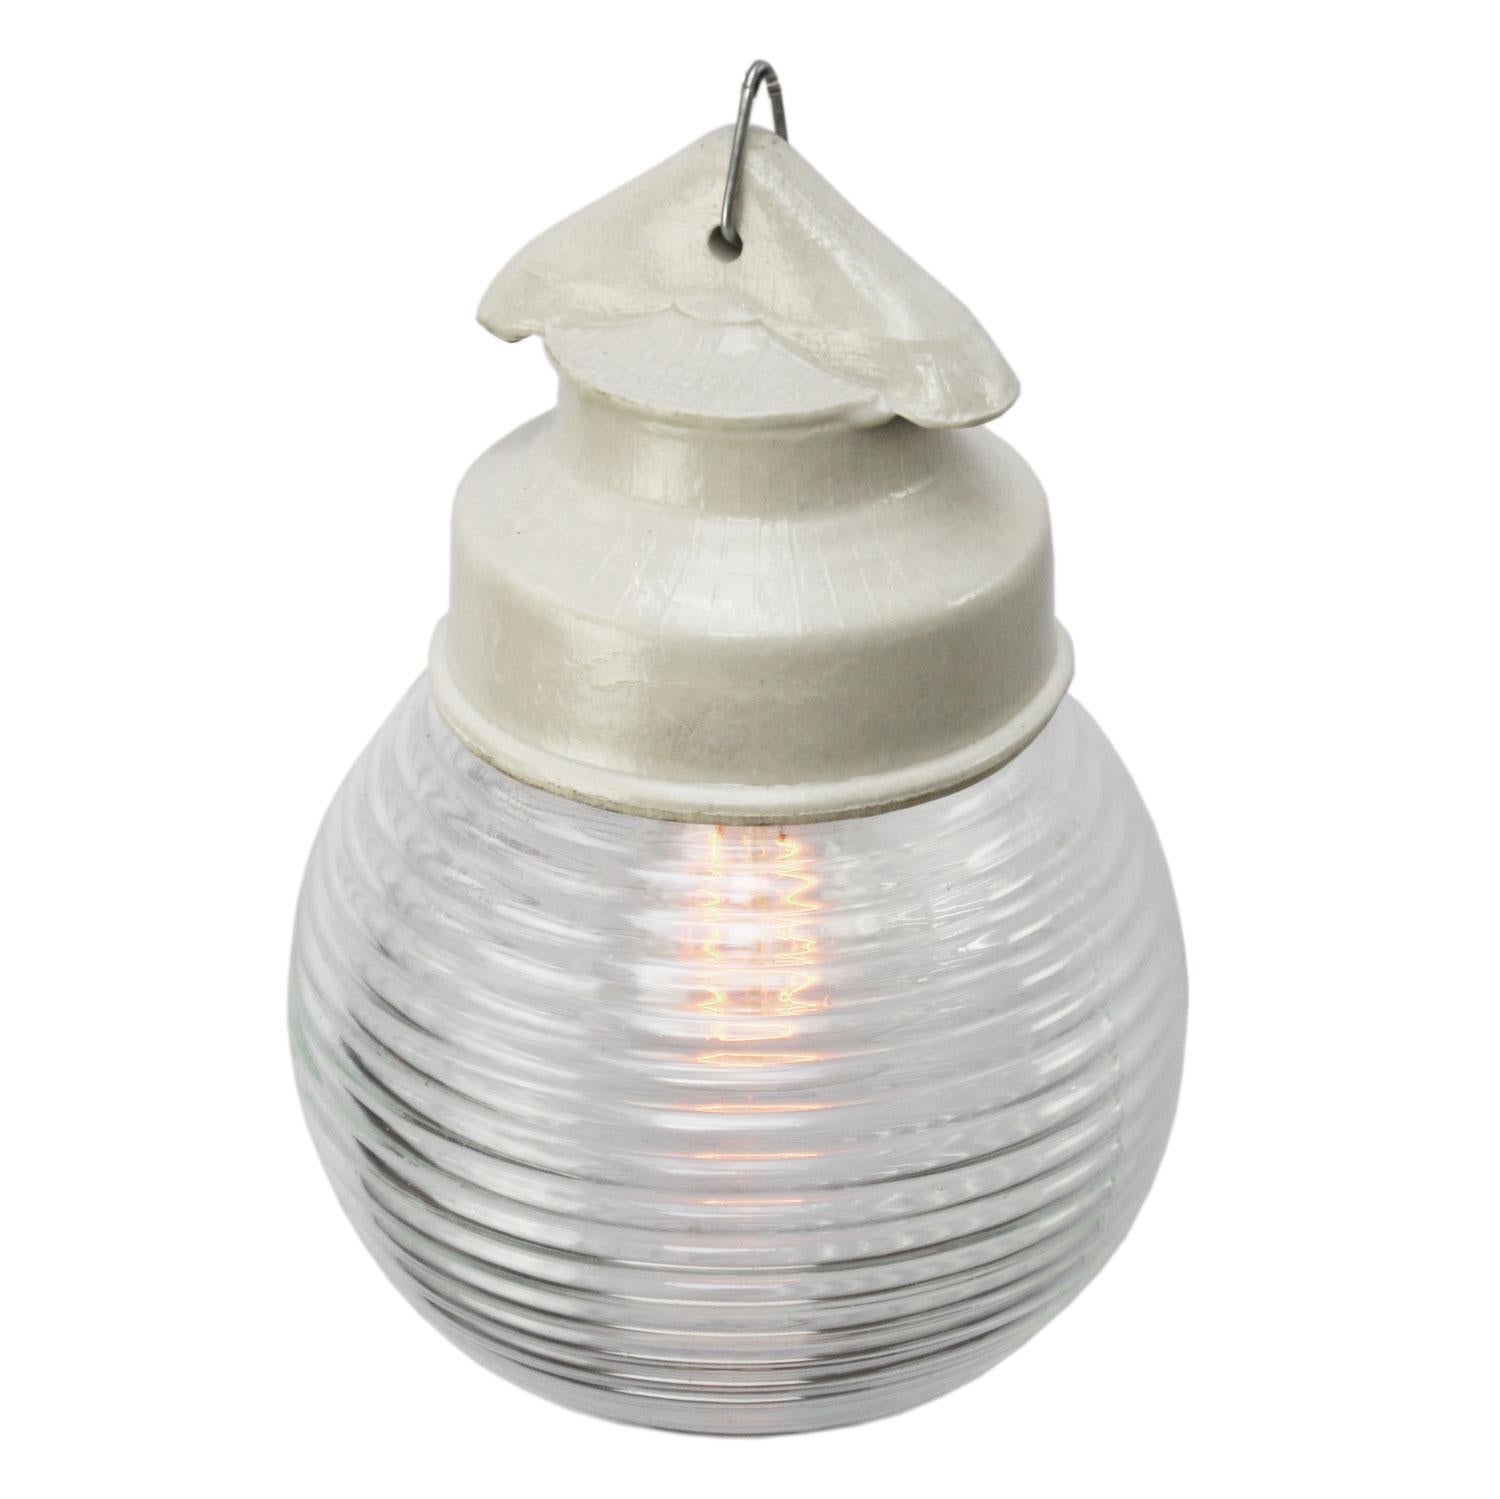 Industrial pendant.
White porcelain, clear glass.
2 conductors, no ground.

Weight: 1.06 kg / 2.3 lb

Priced per individual item. All lamps have been made suitable by international standards for incandescent light bulbs, energy-efficient and